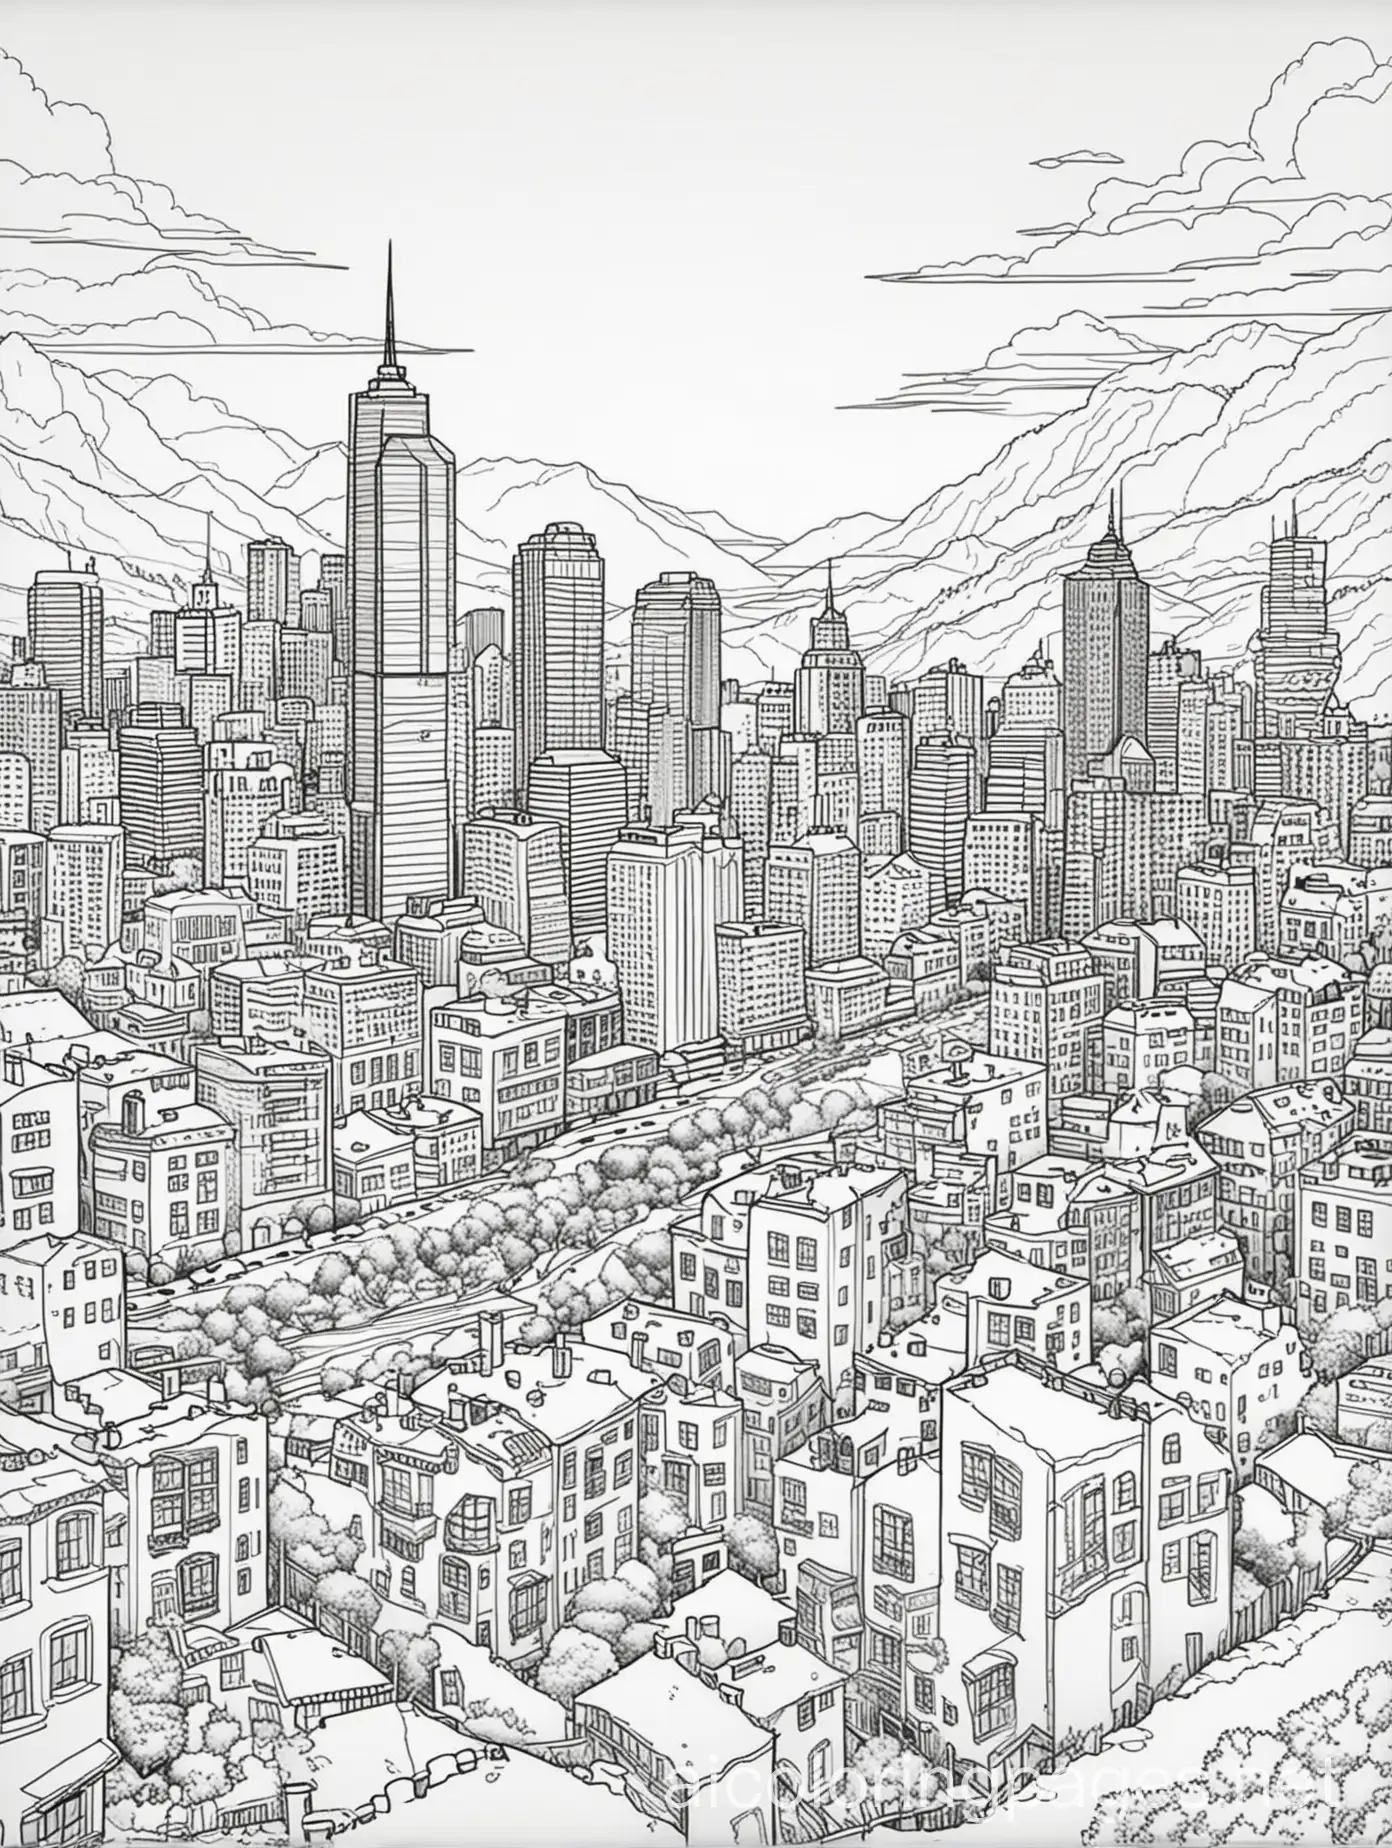 Metropolitan-City-Coloring-Page-for-Kids-Line-Drawing-of-Urban-Landscape